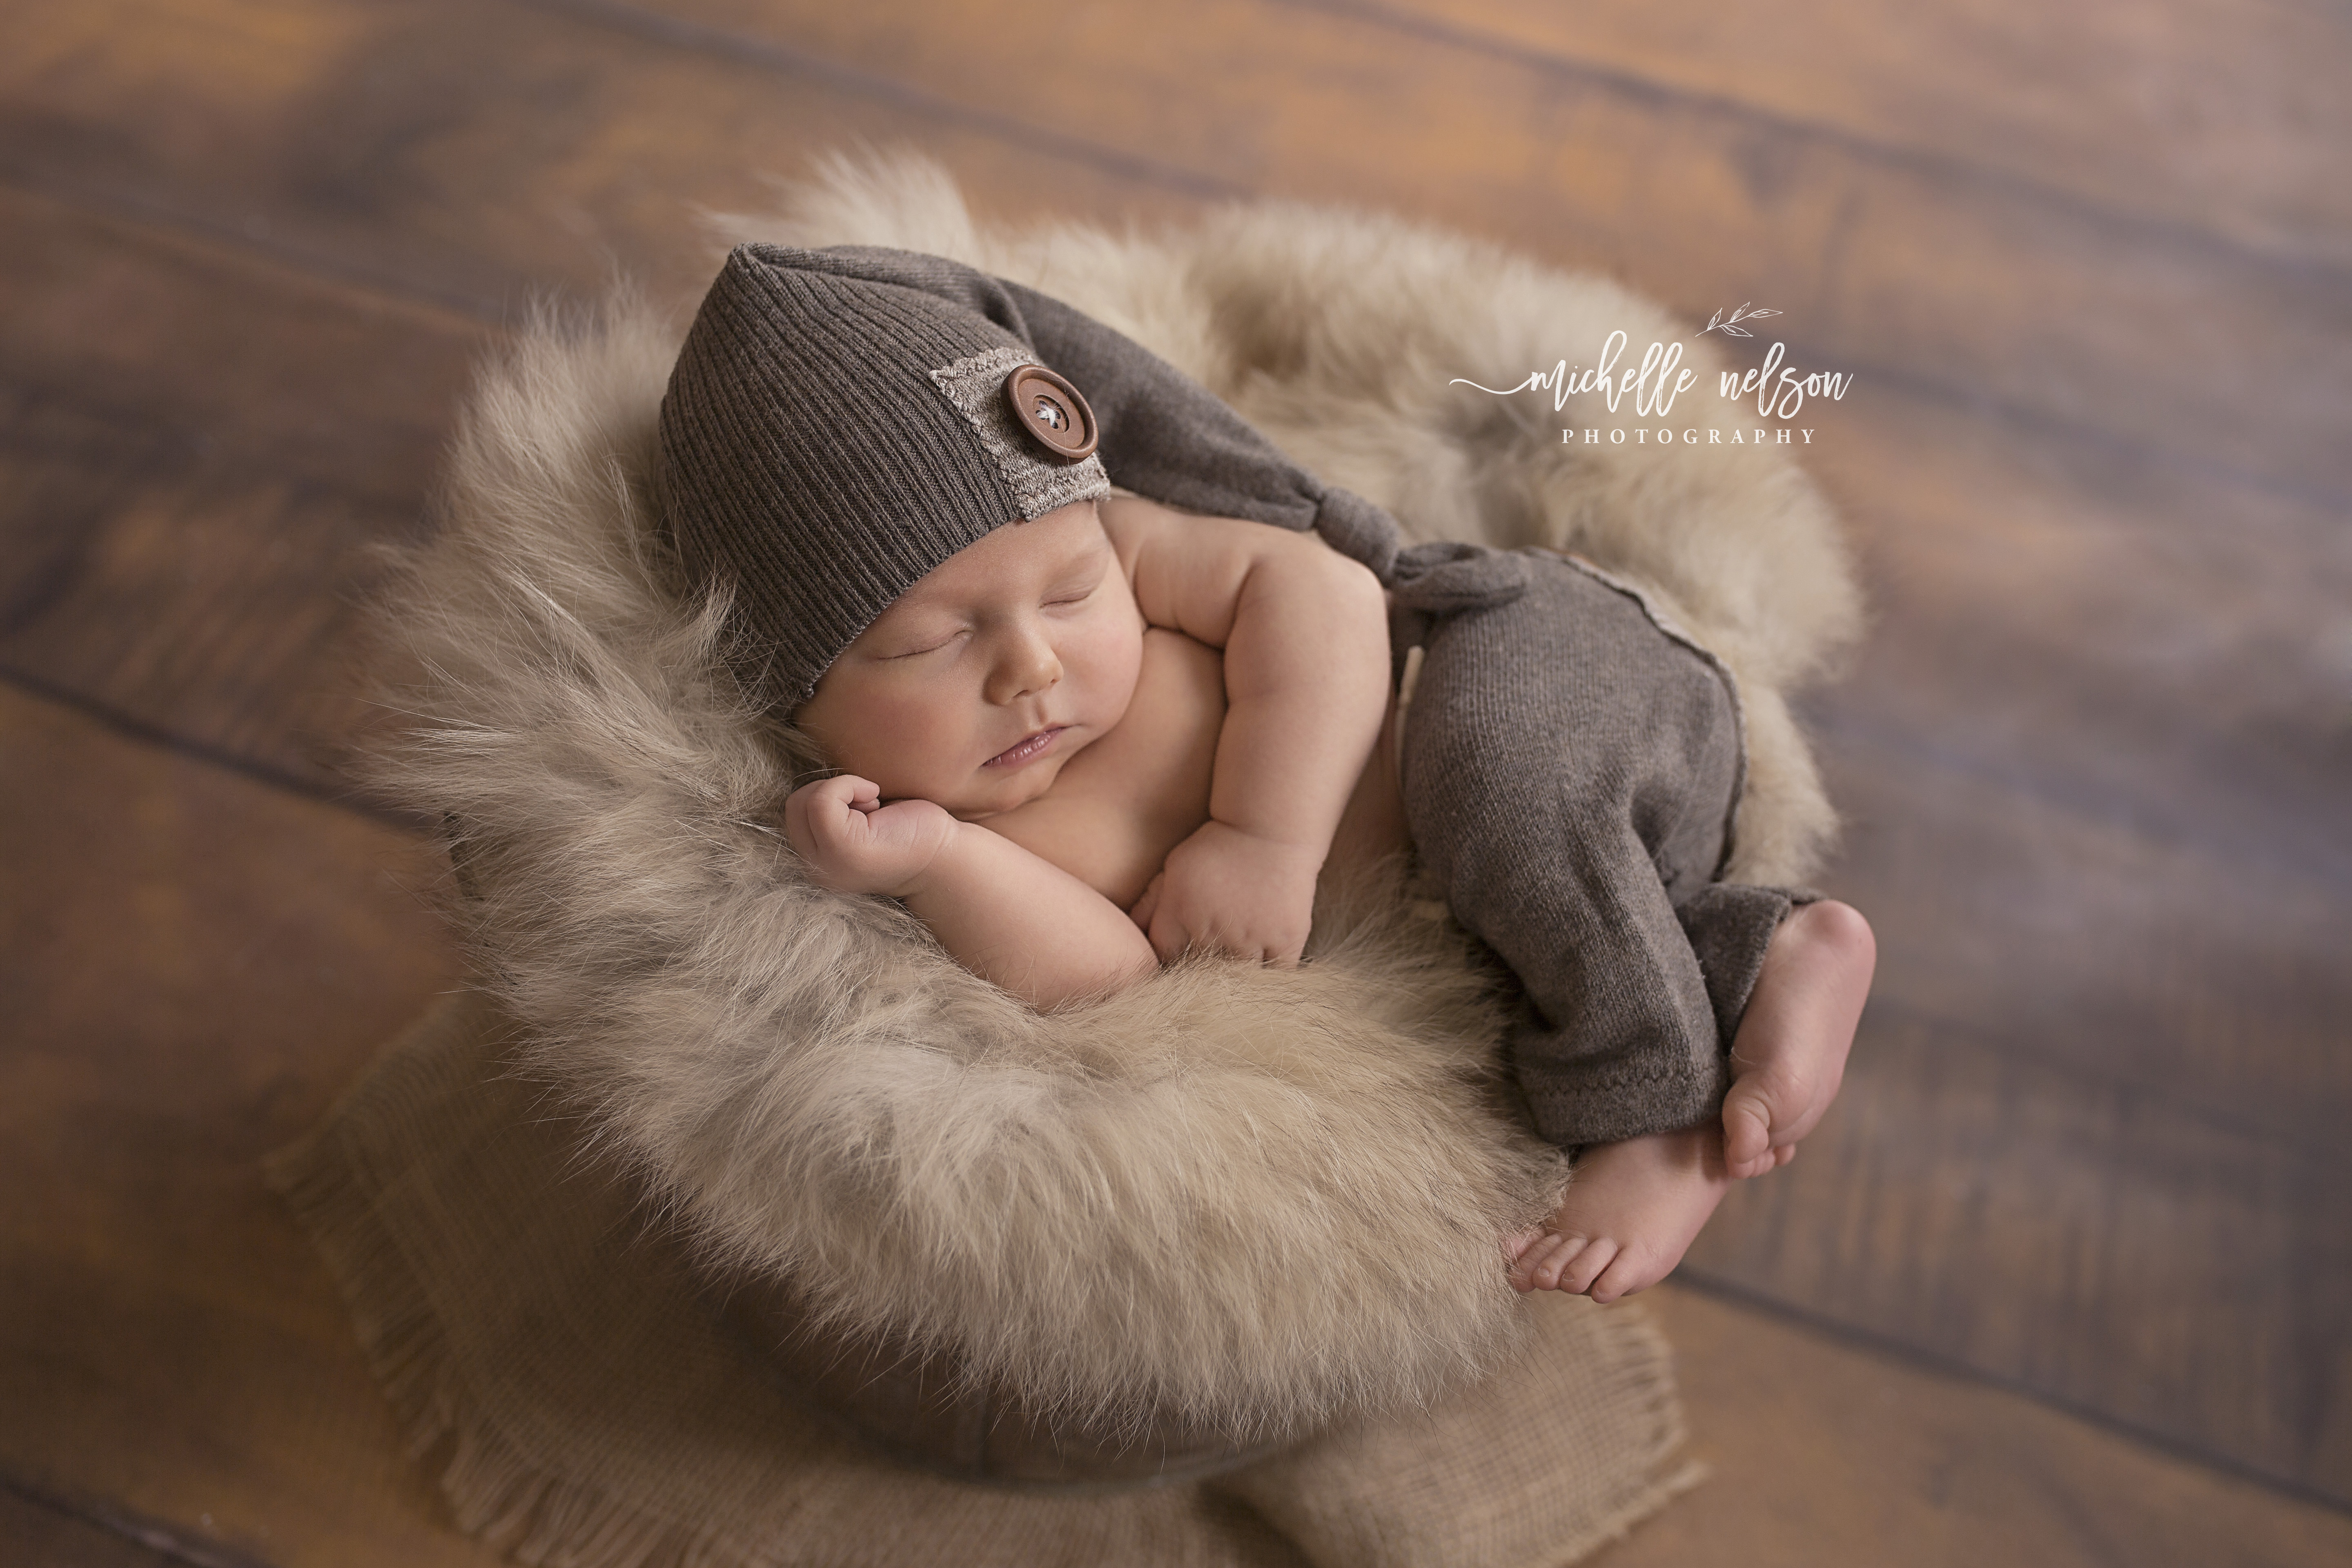 Snuggle in little one…